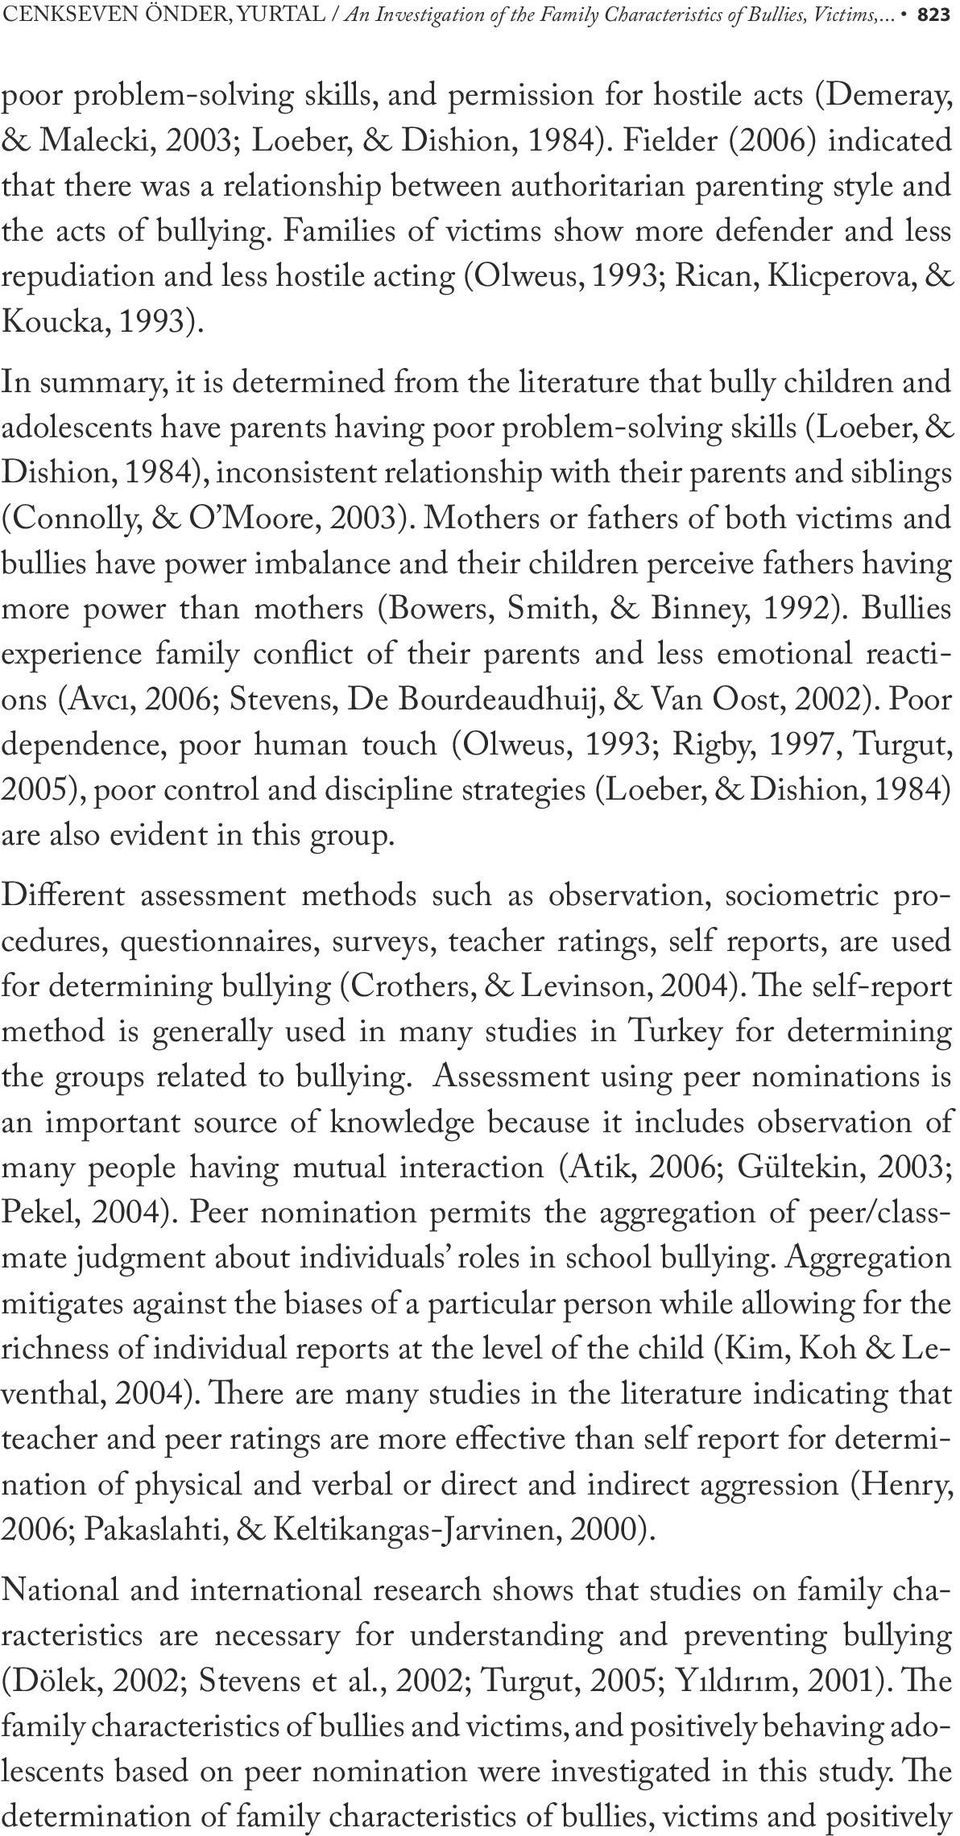 Fielder (2006) indicated that there was a relationship between authoritarian parenting style and the acts of bullying.